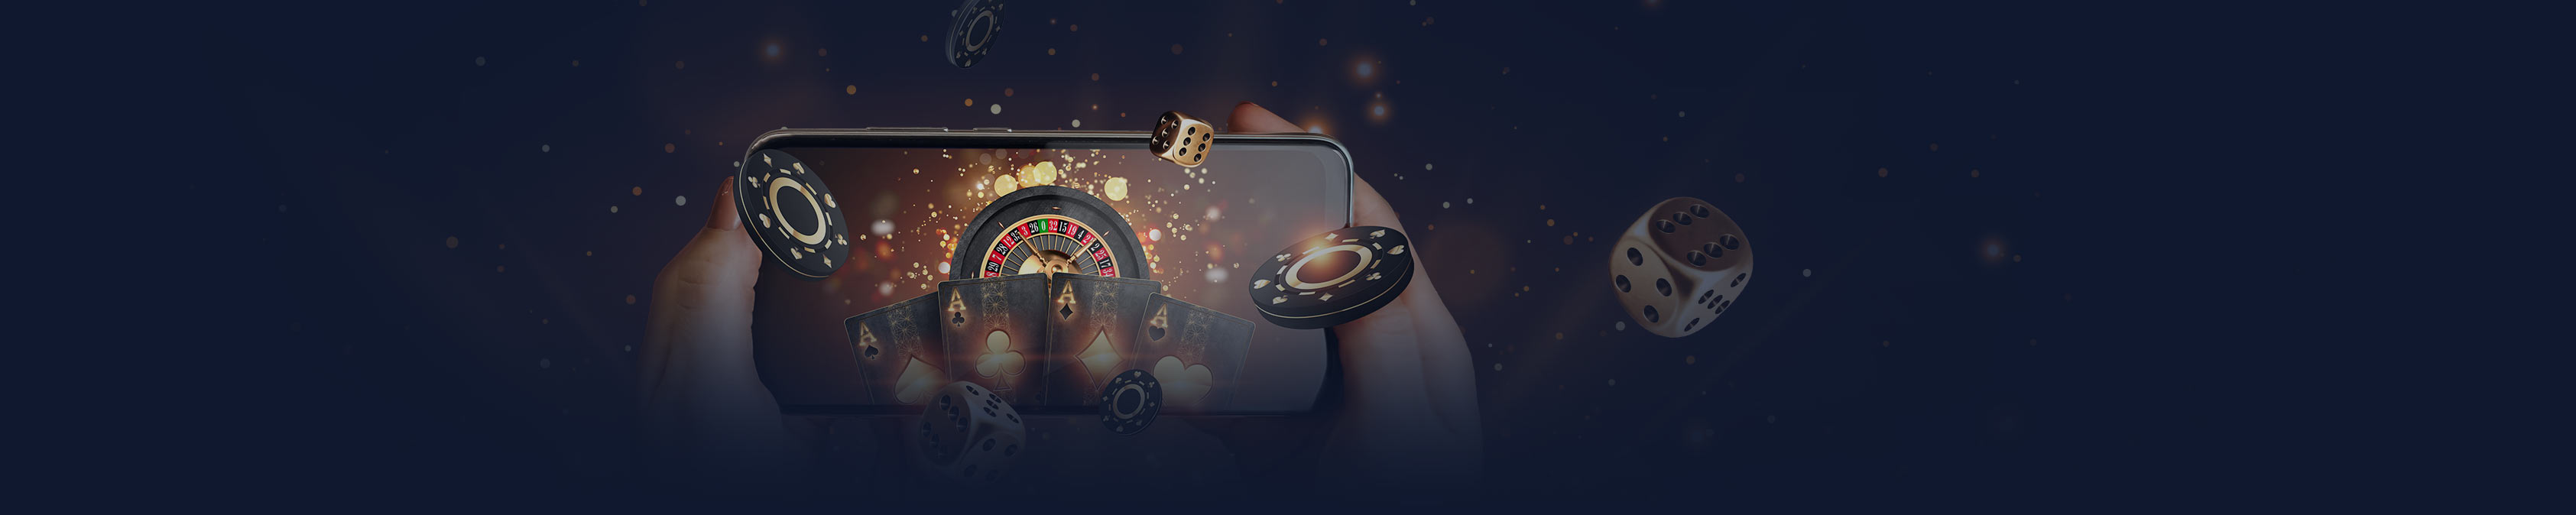 How to play casino games by Betinsight Games